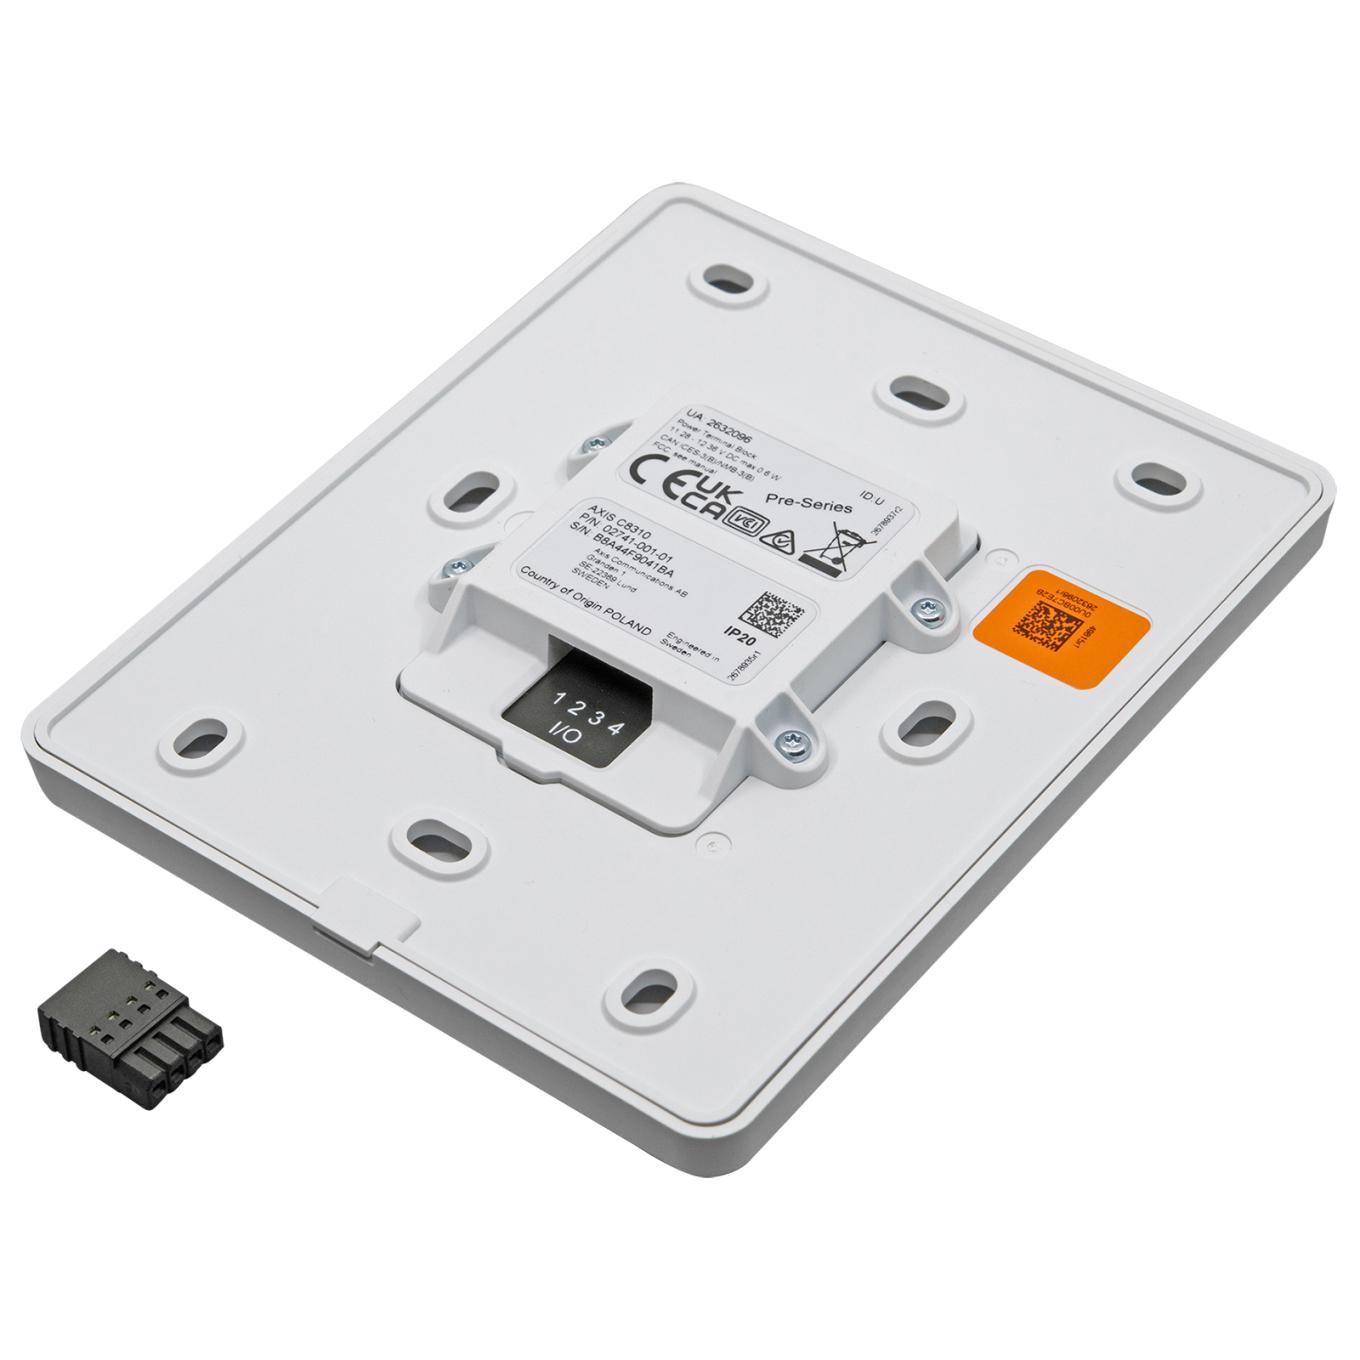 White volume controller for wall mount. C8310 is viewed from its right.